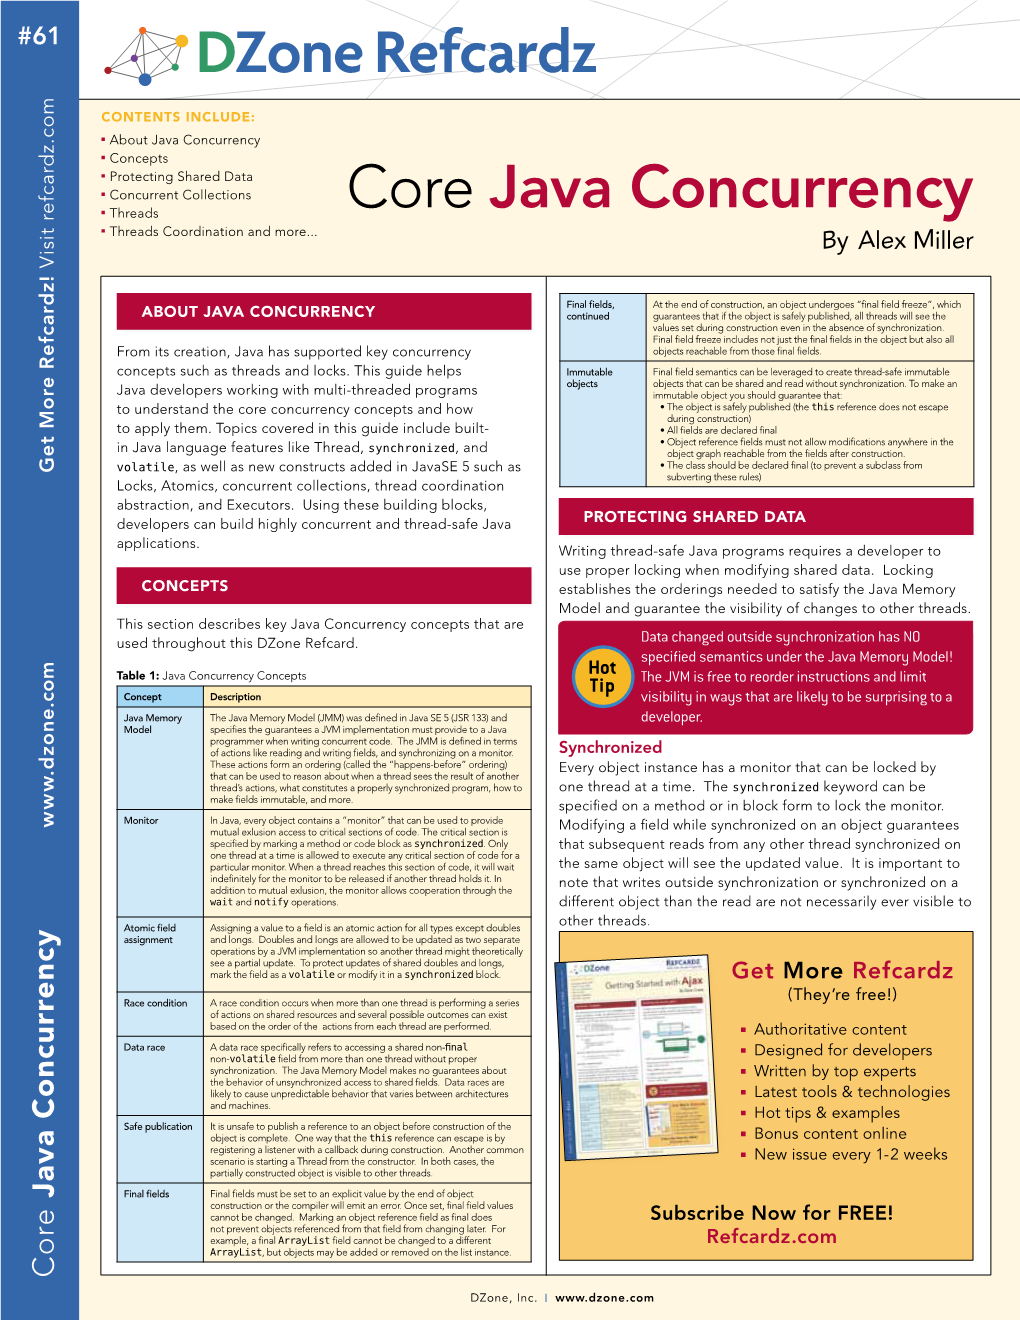 Core Java Concurrency N Threads Coordination and More